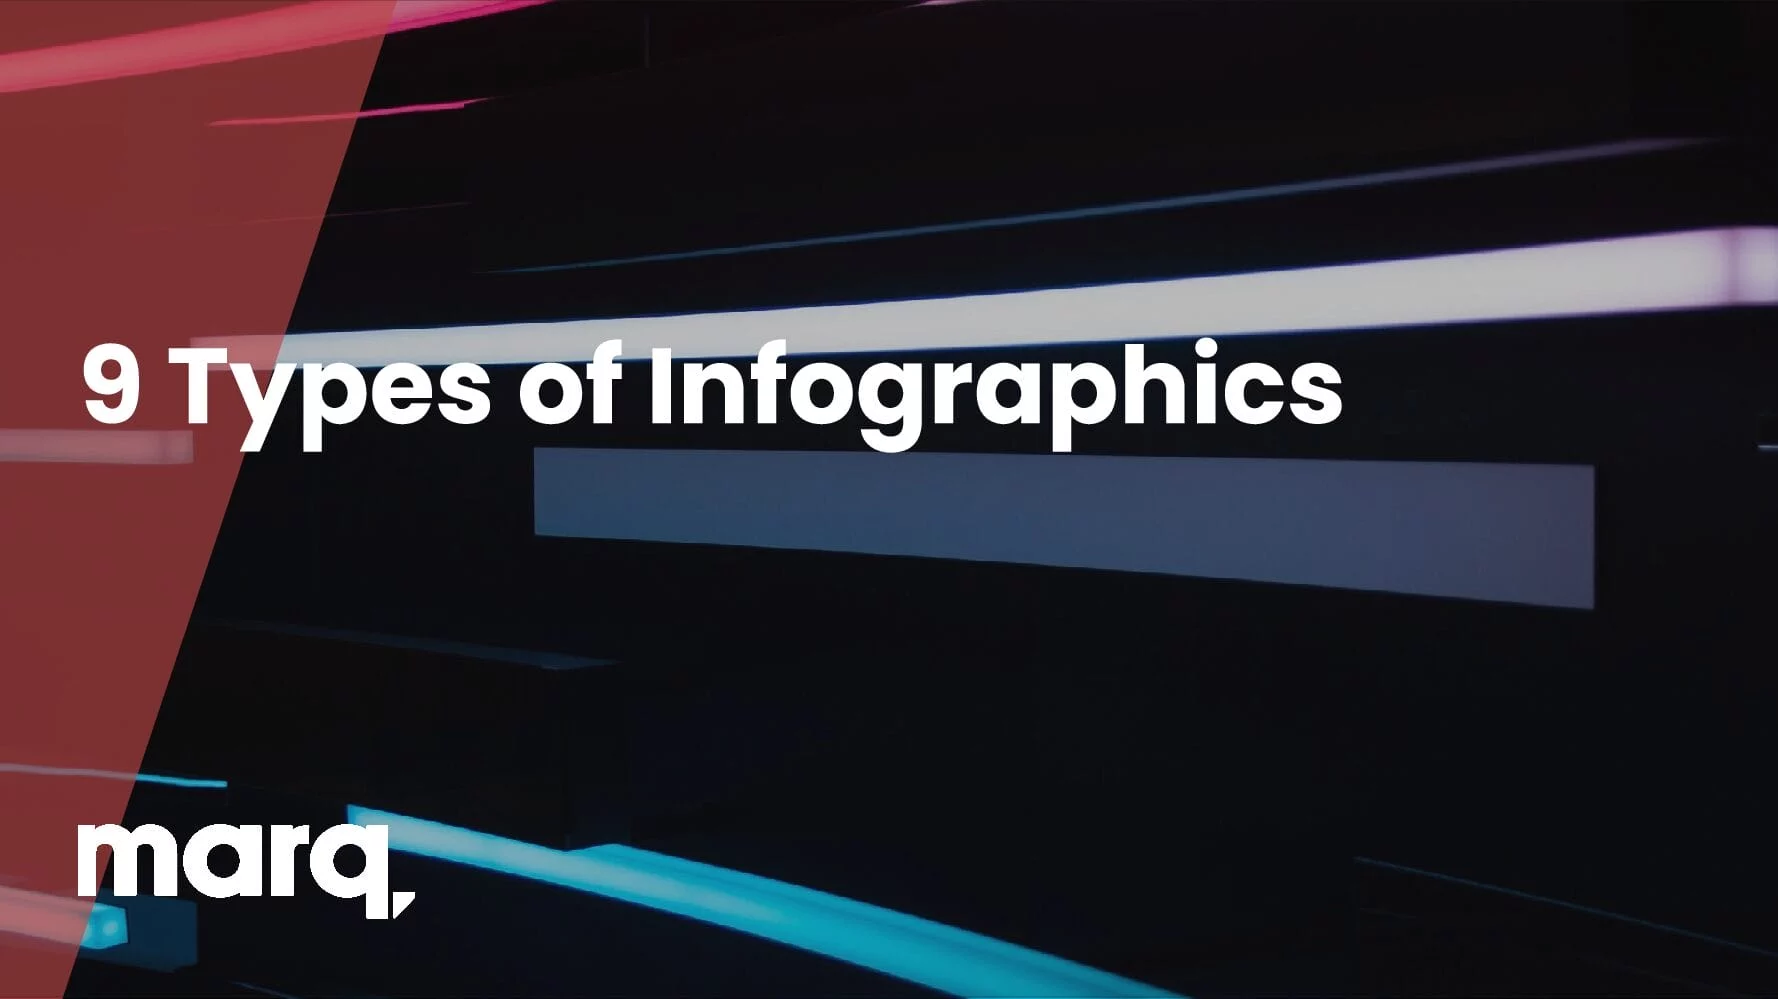 The 9 Types of Infographics